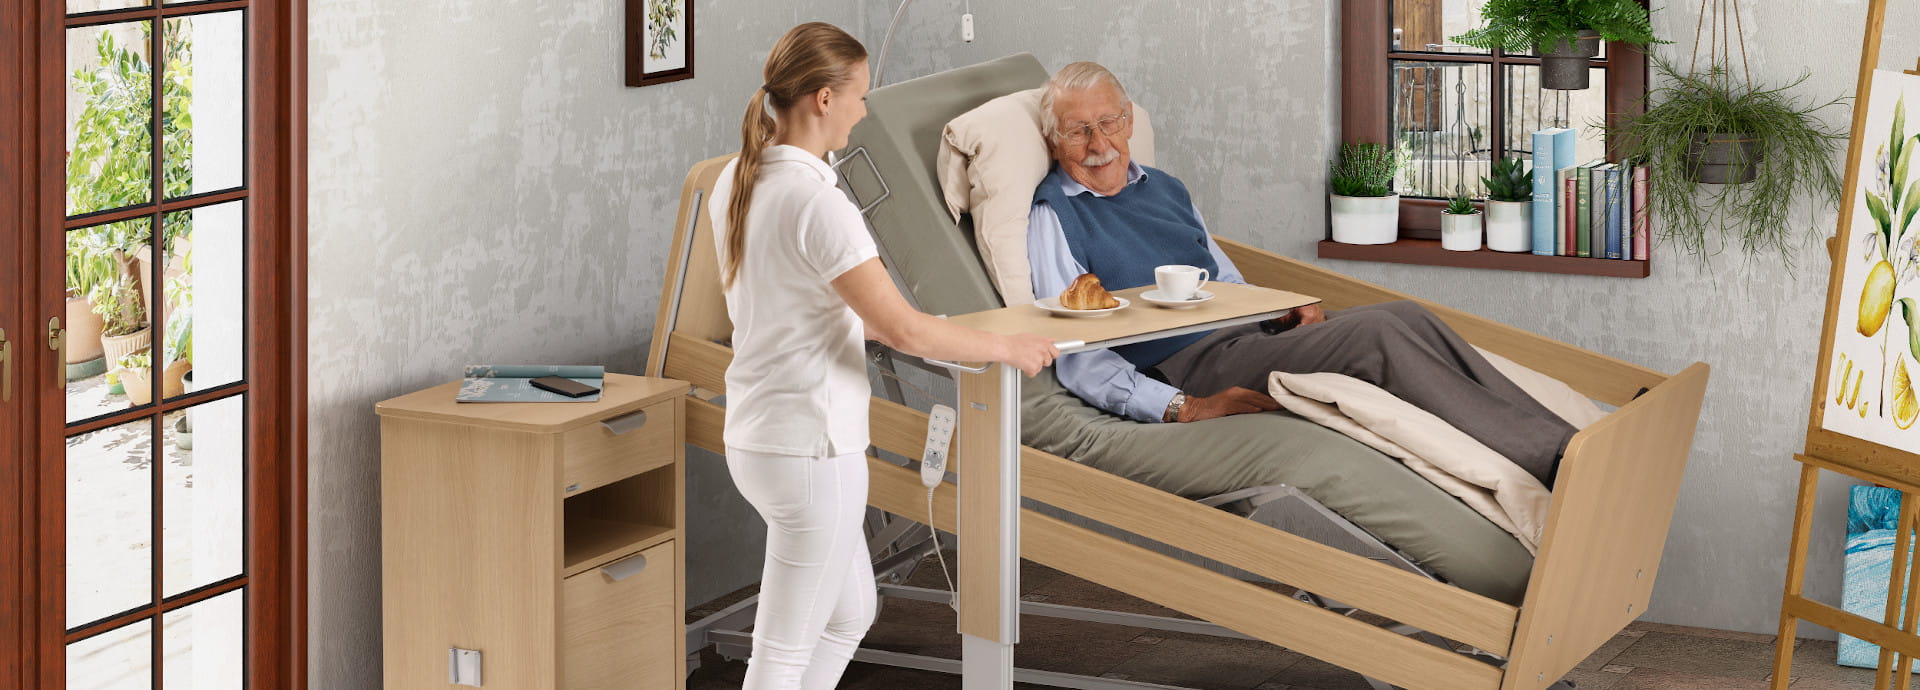 With innovative functions, the movita sc nursing bed enables comfortable care while ensuring the highest level of product safety.  